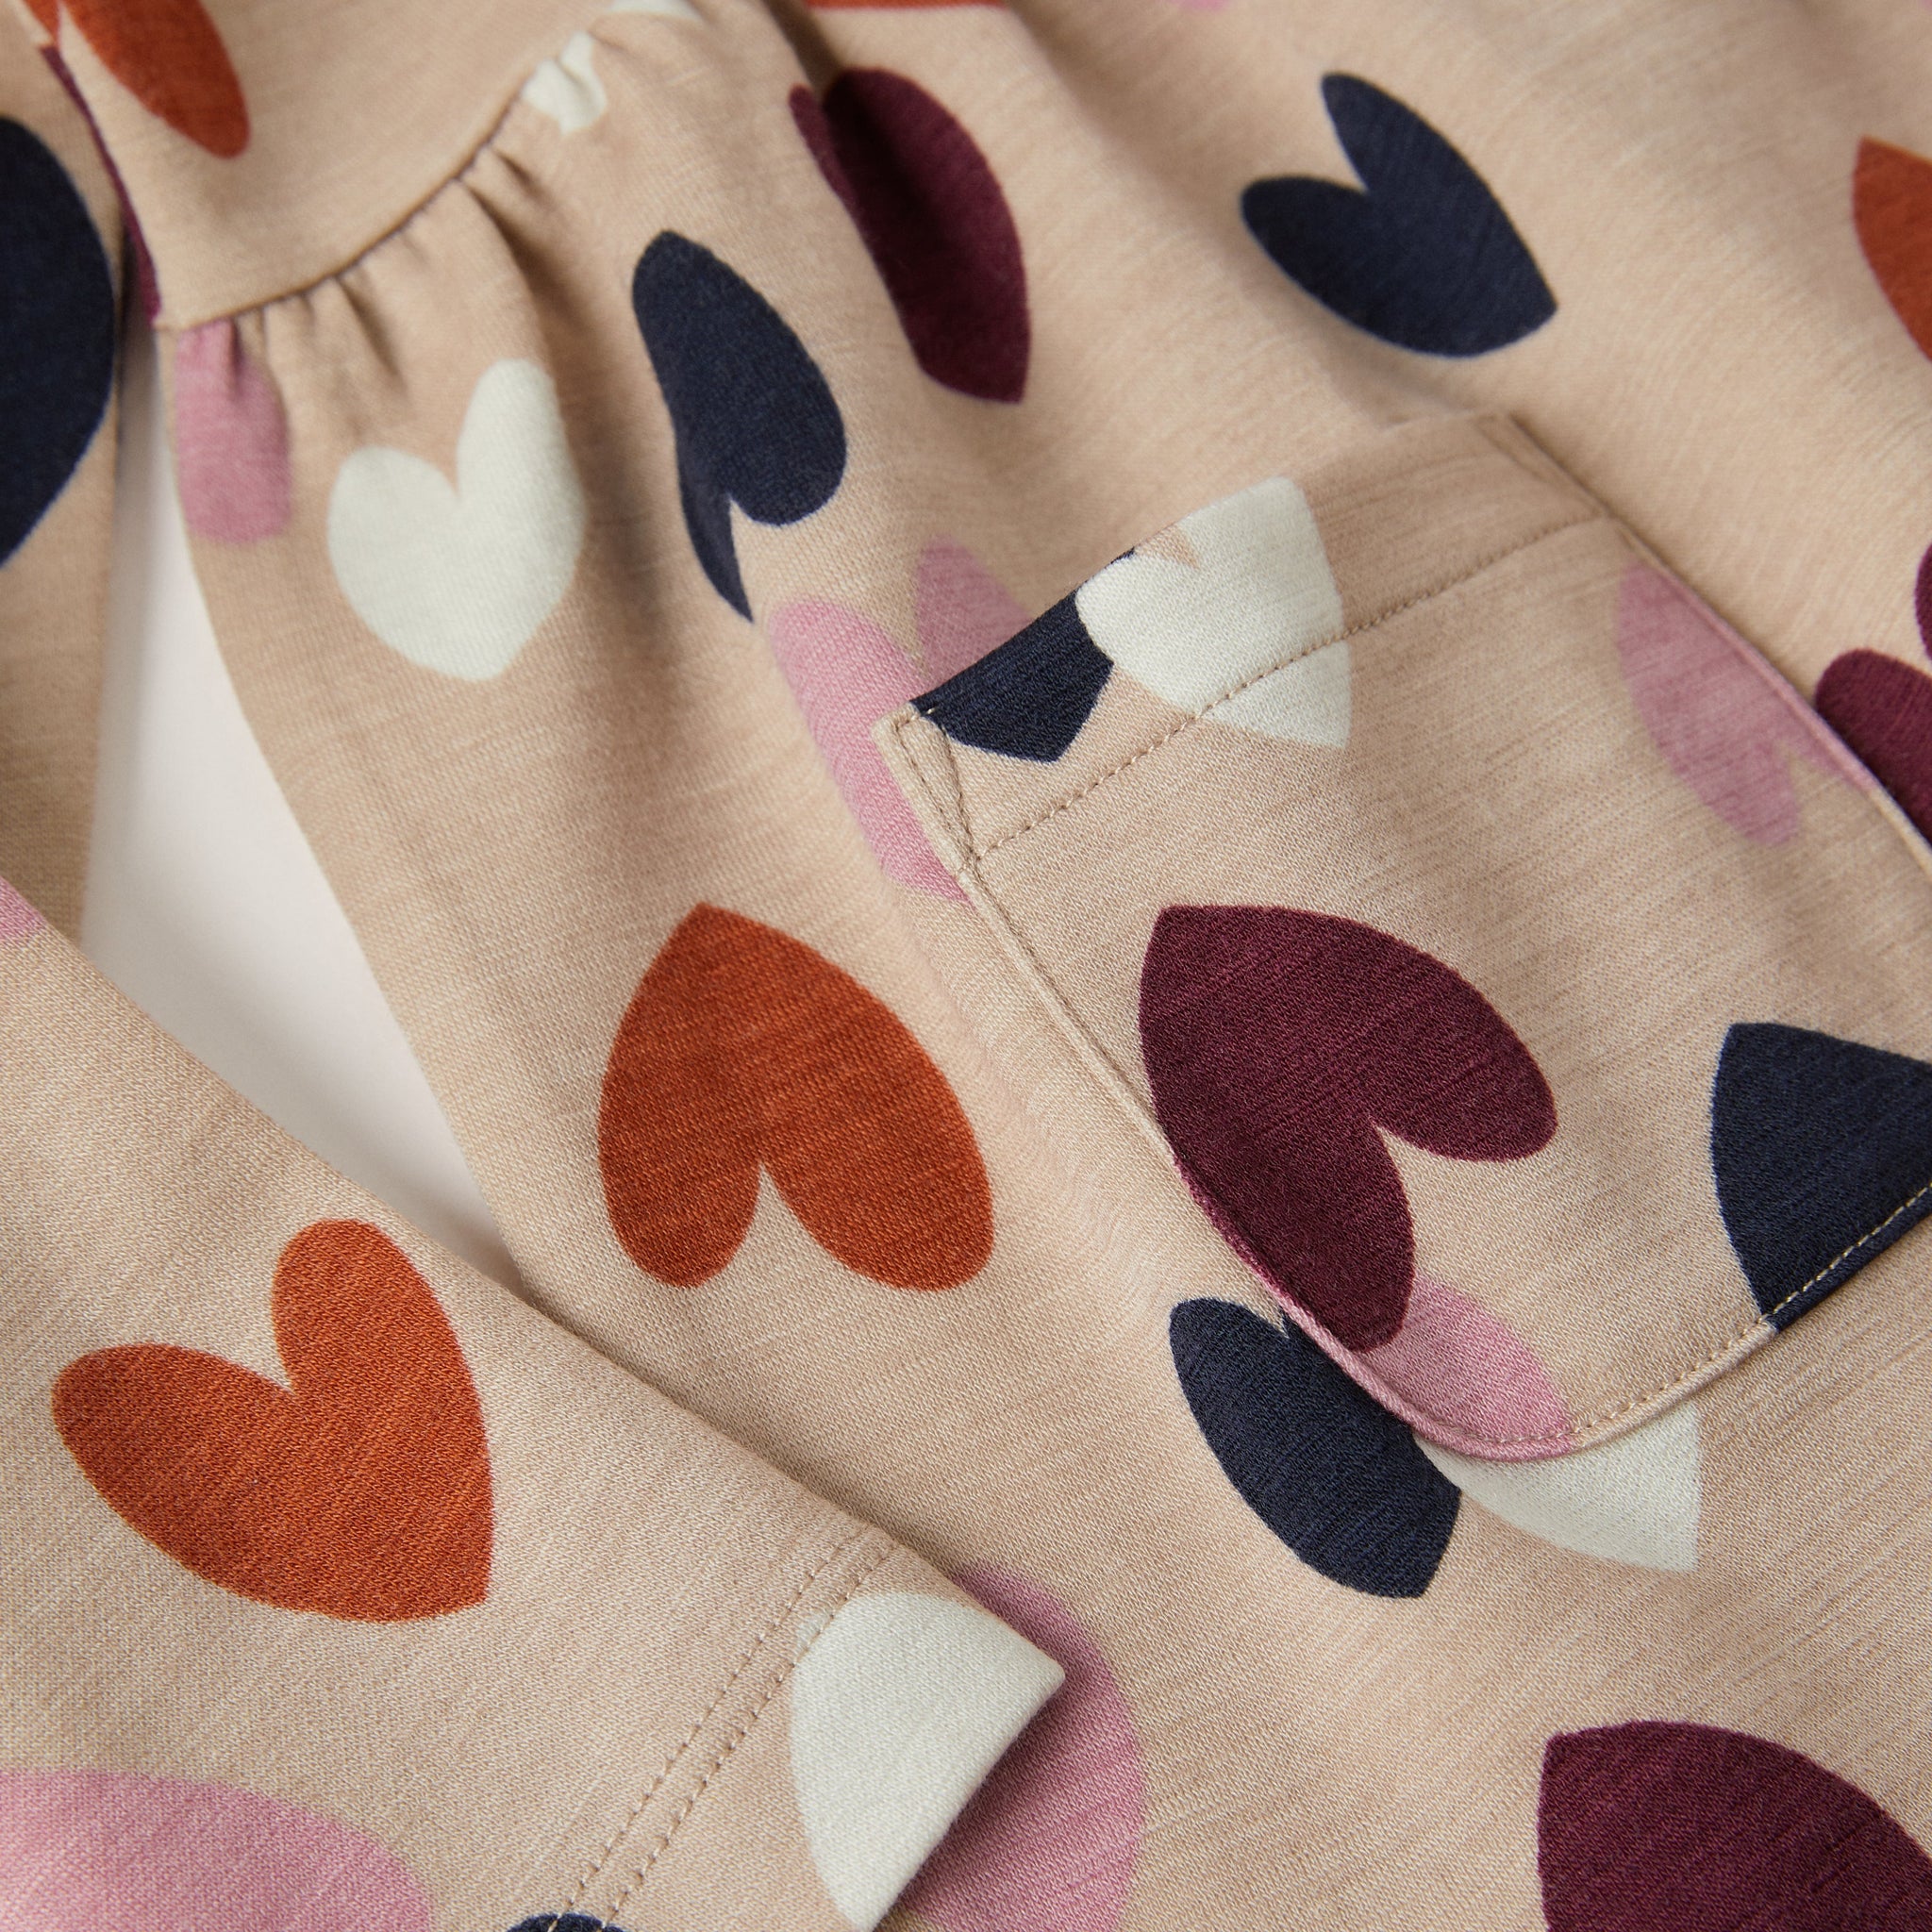 Heart Print Girls Dress from the Polarn O. Pyret kidswear collection. Clothes made using sustainably sourced materials.